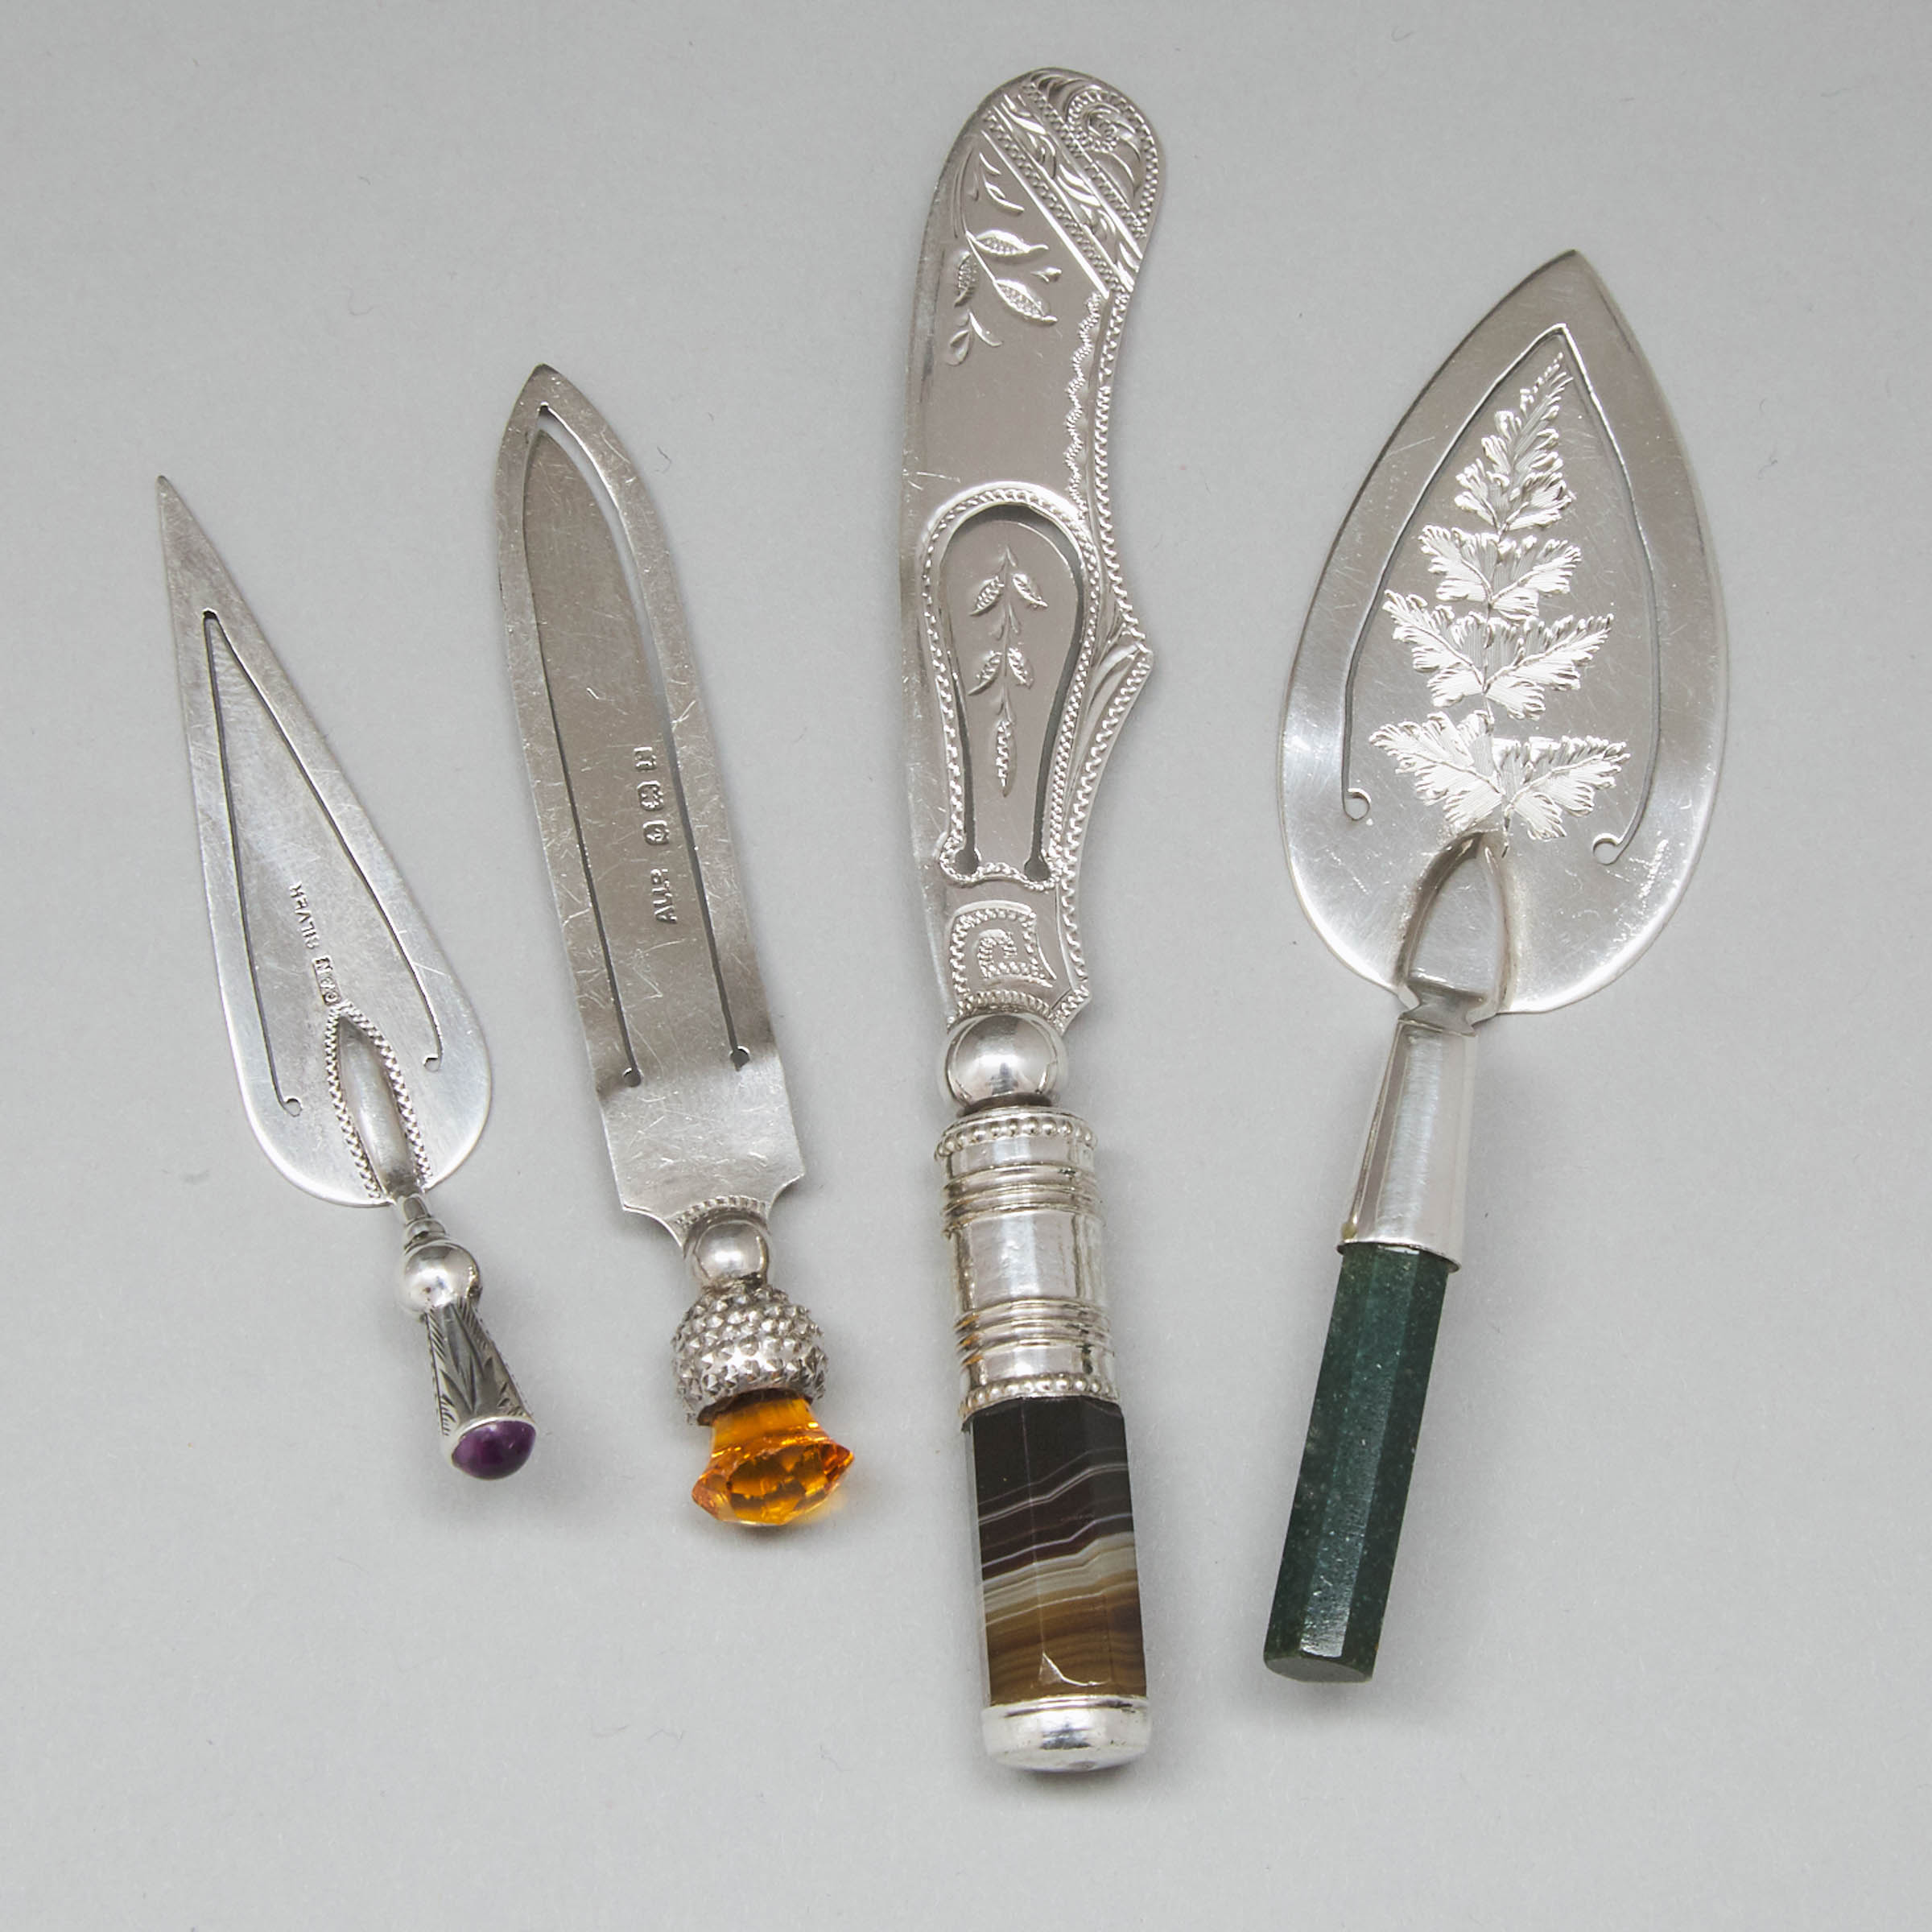 Four Mainly Edwardian Hardstone, Amethyst and Citrine Mounted Silver Bookmarks, London and Birmingham, c.1898-1916